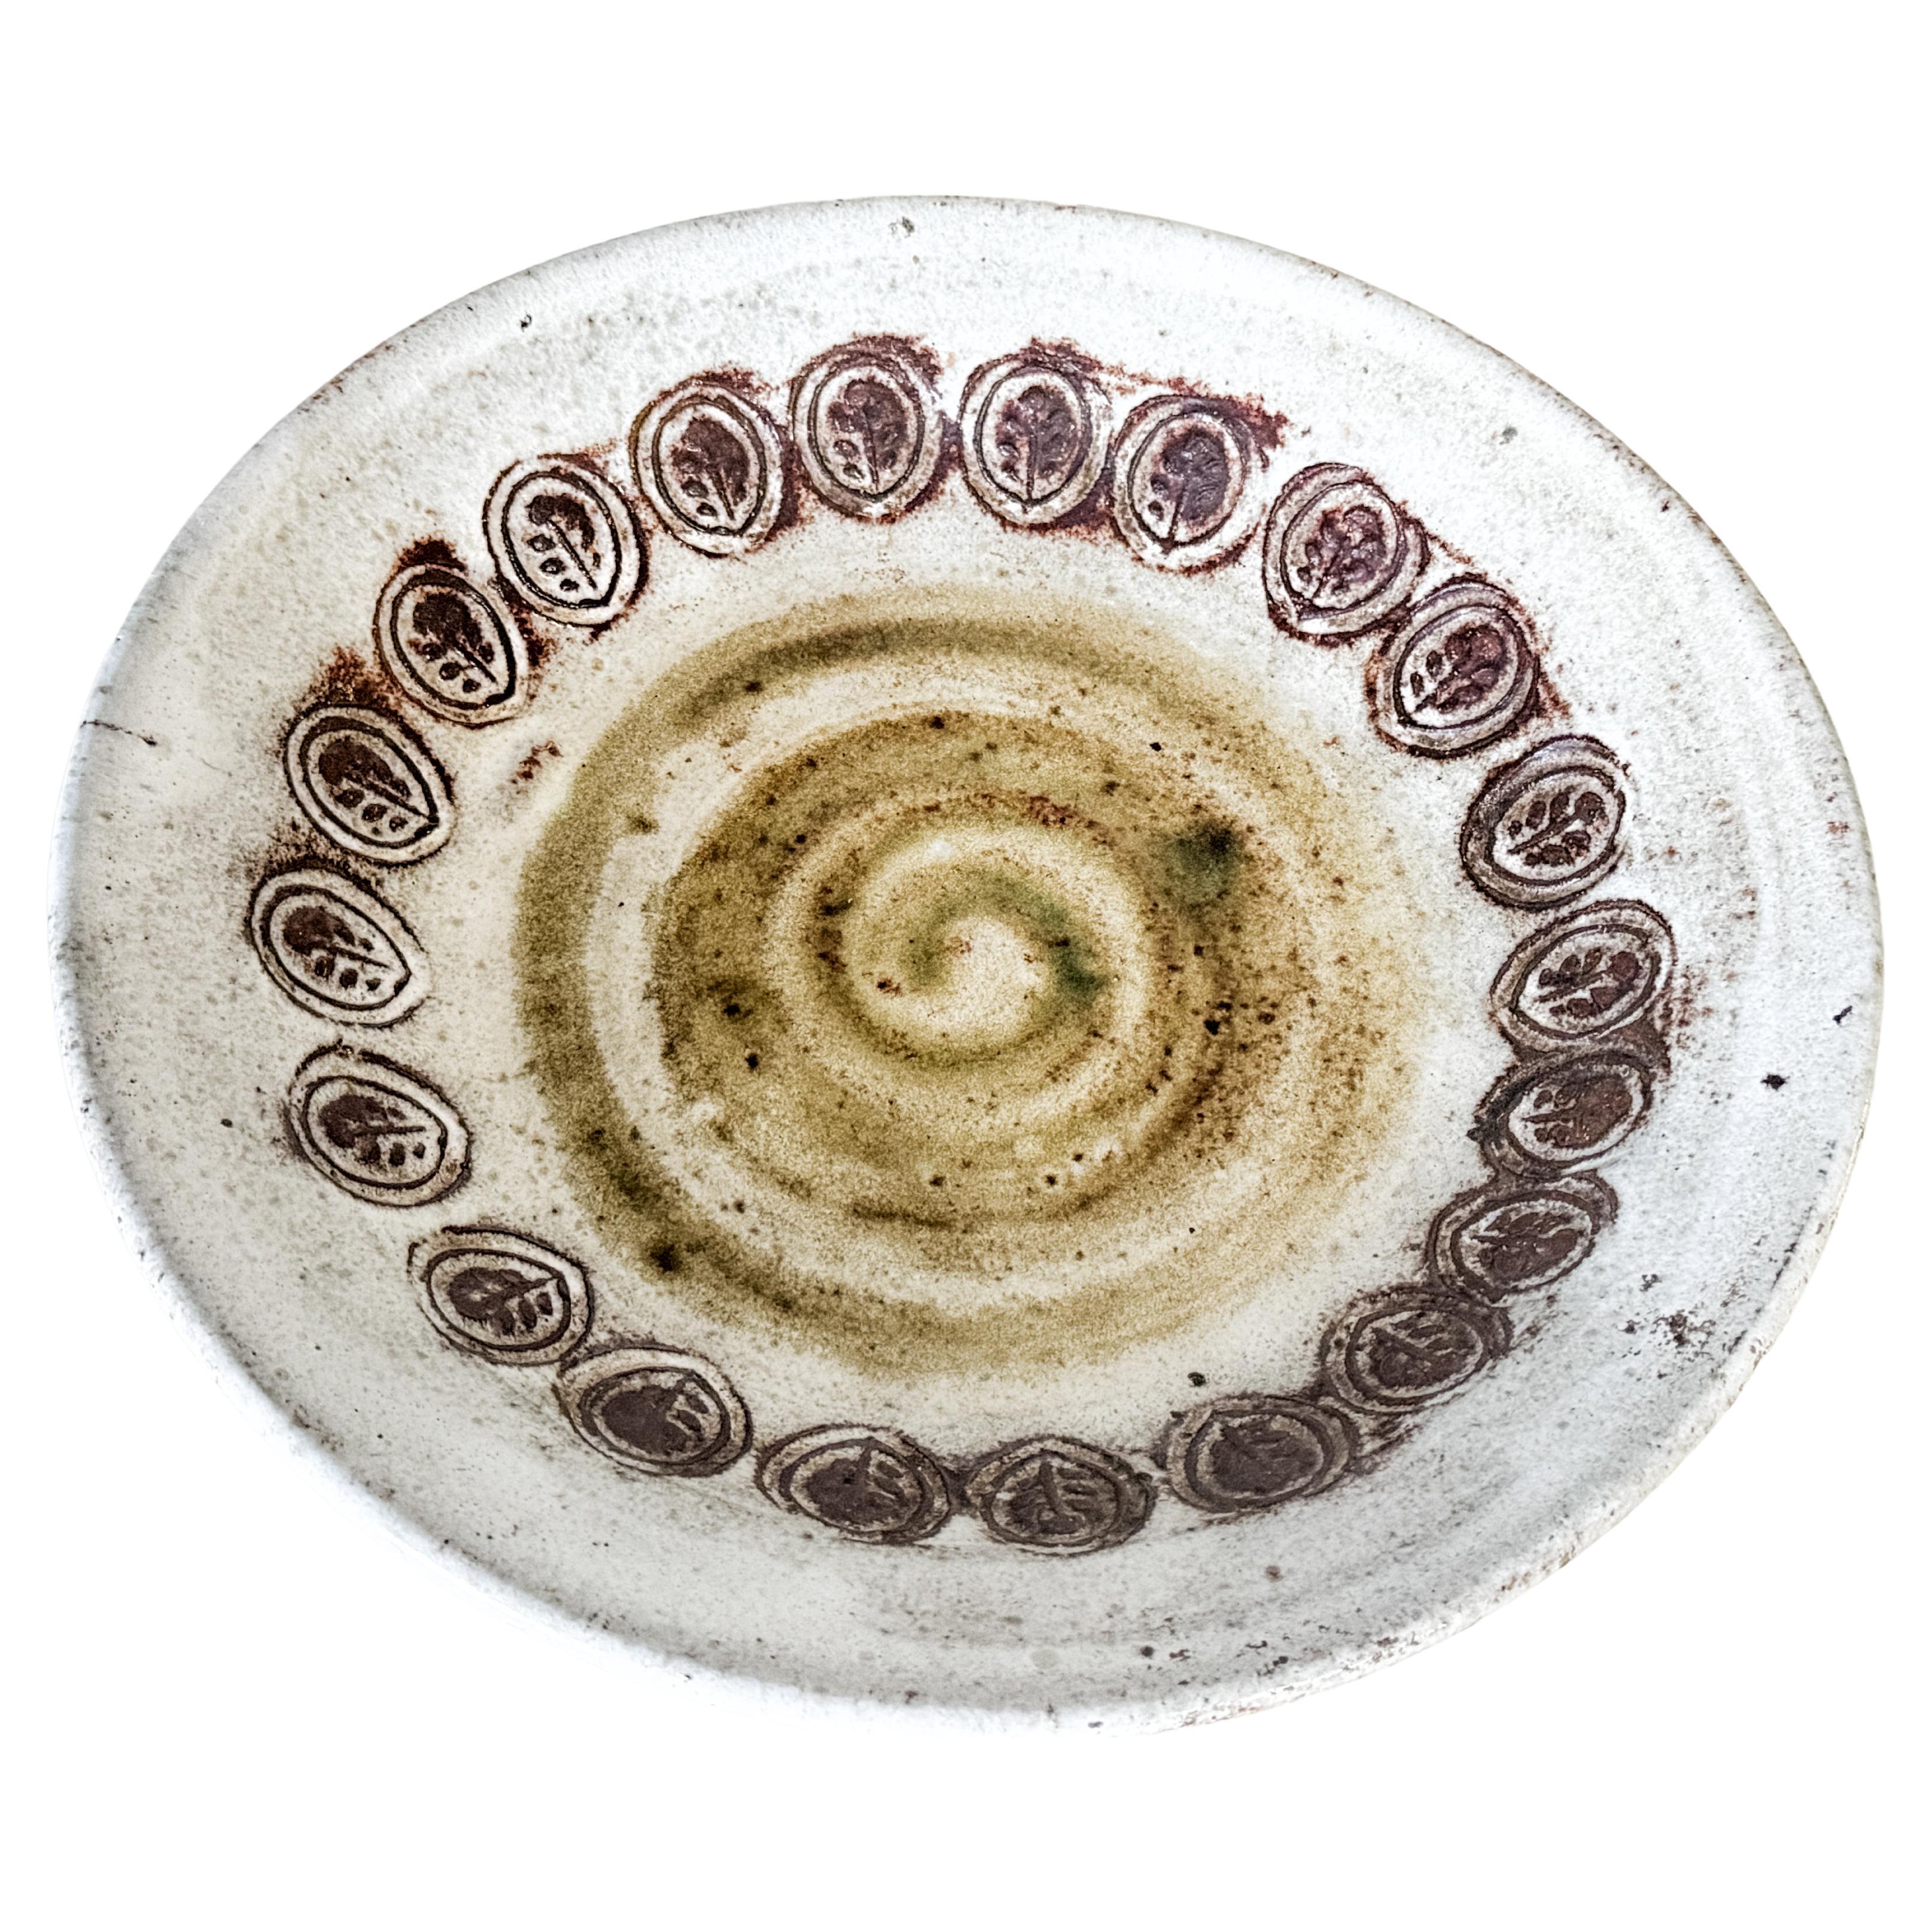 French ceramic decorative dish  (c. 1960s) by Albert Thiry. Boat-shaped ceramic dish with milky-white glazed exterior. Within the dish you find the same base glaze mixed with thistle motif in Brown and White. The lip of the dish is white . Very